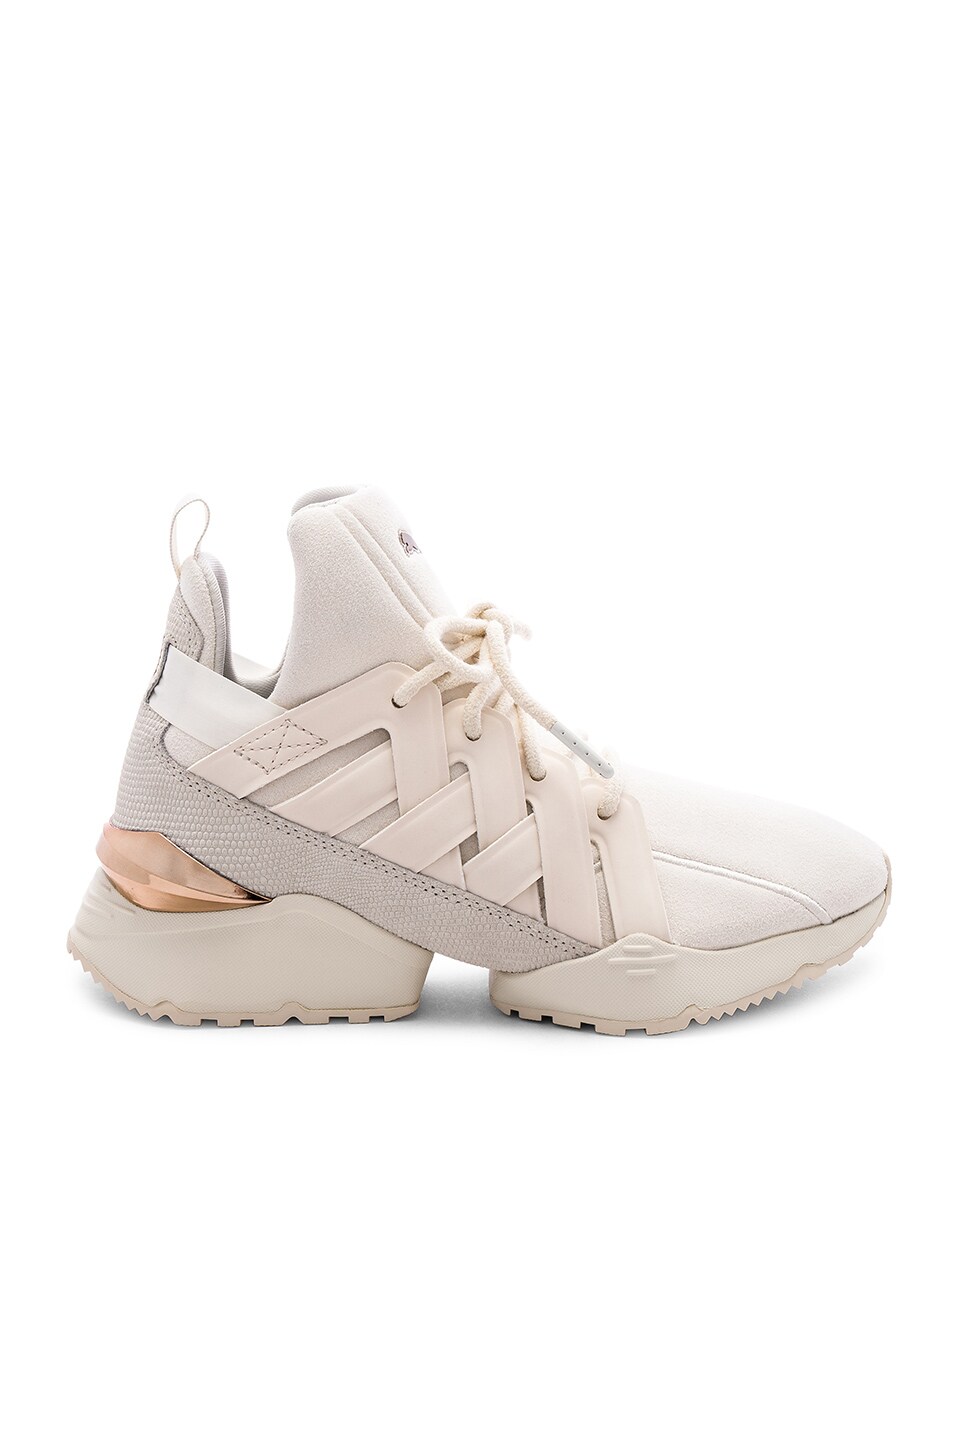 Excuse me rifle All kinds of Puma Muse Echo Escape Sneaker in Whisper White | REVOLVE